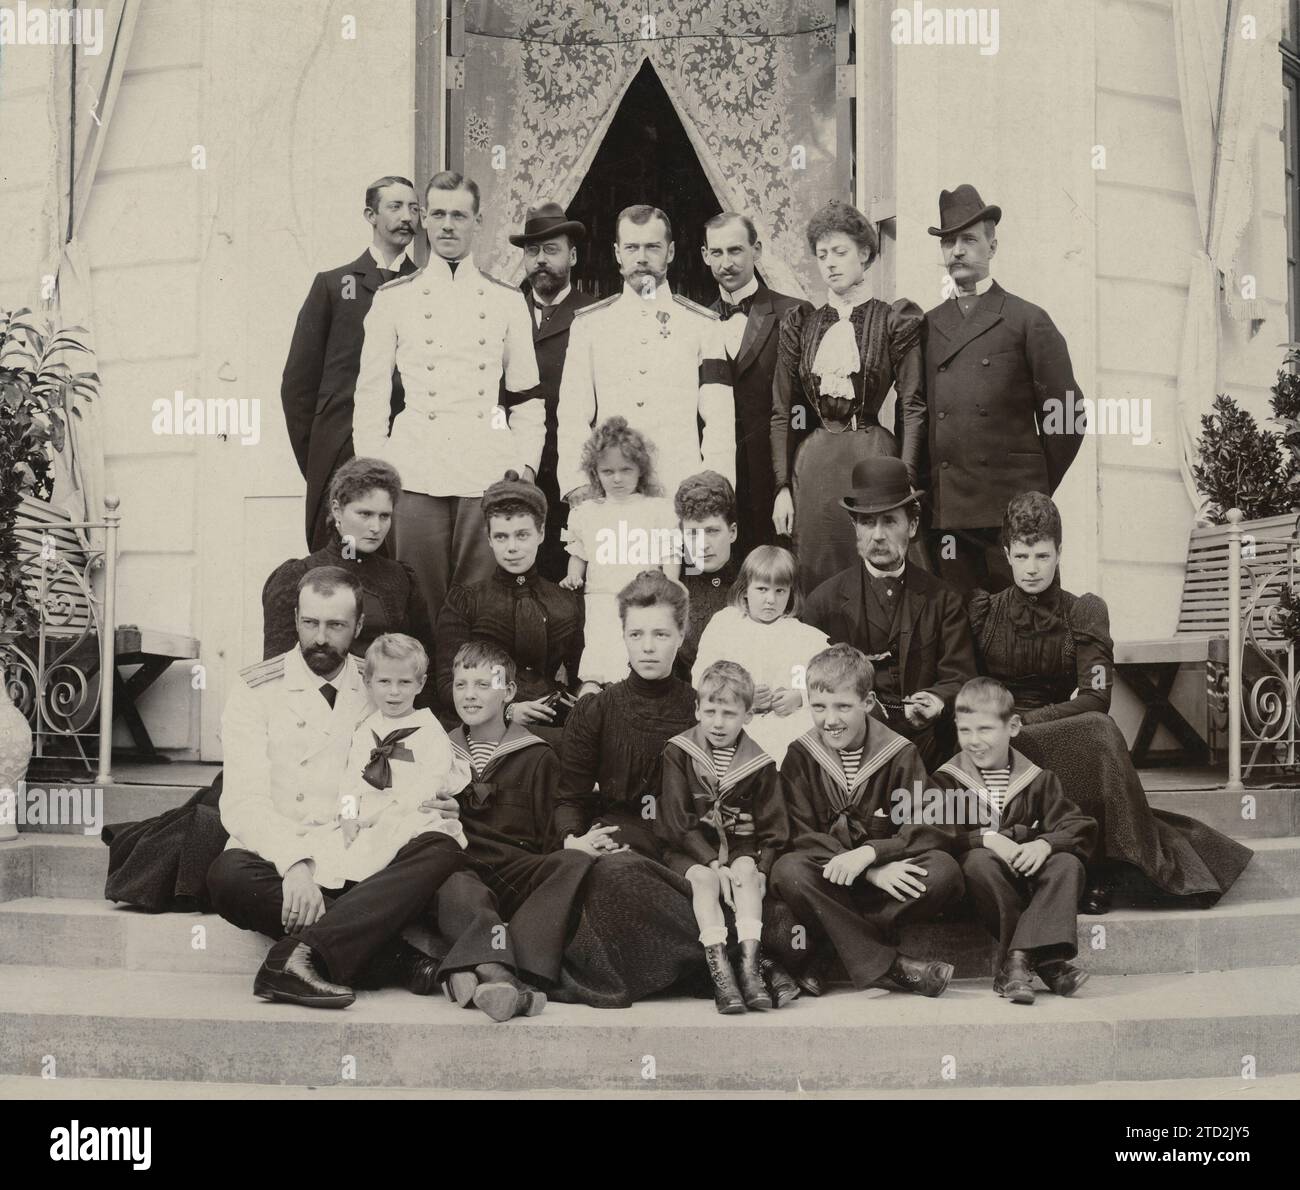 Copenhagen (Denmark), 1899. Tsar Nicholas II of Russia with his family at Bernsdorff Castle. His mother, Tsarina Maria, appears in the image; his wife, Tsarina Alexandra; his brother Michael and Kings George I of Greece and Christian IX of Denmark, among others. Credit: Album / Archivo ABC Stock Photo